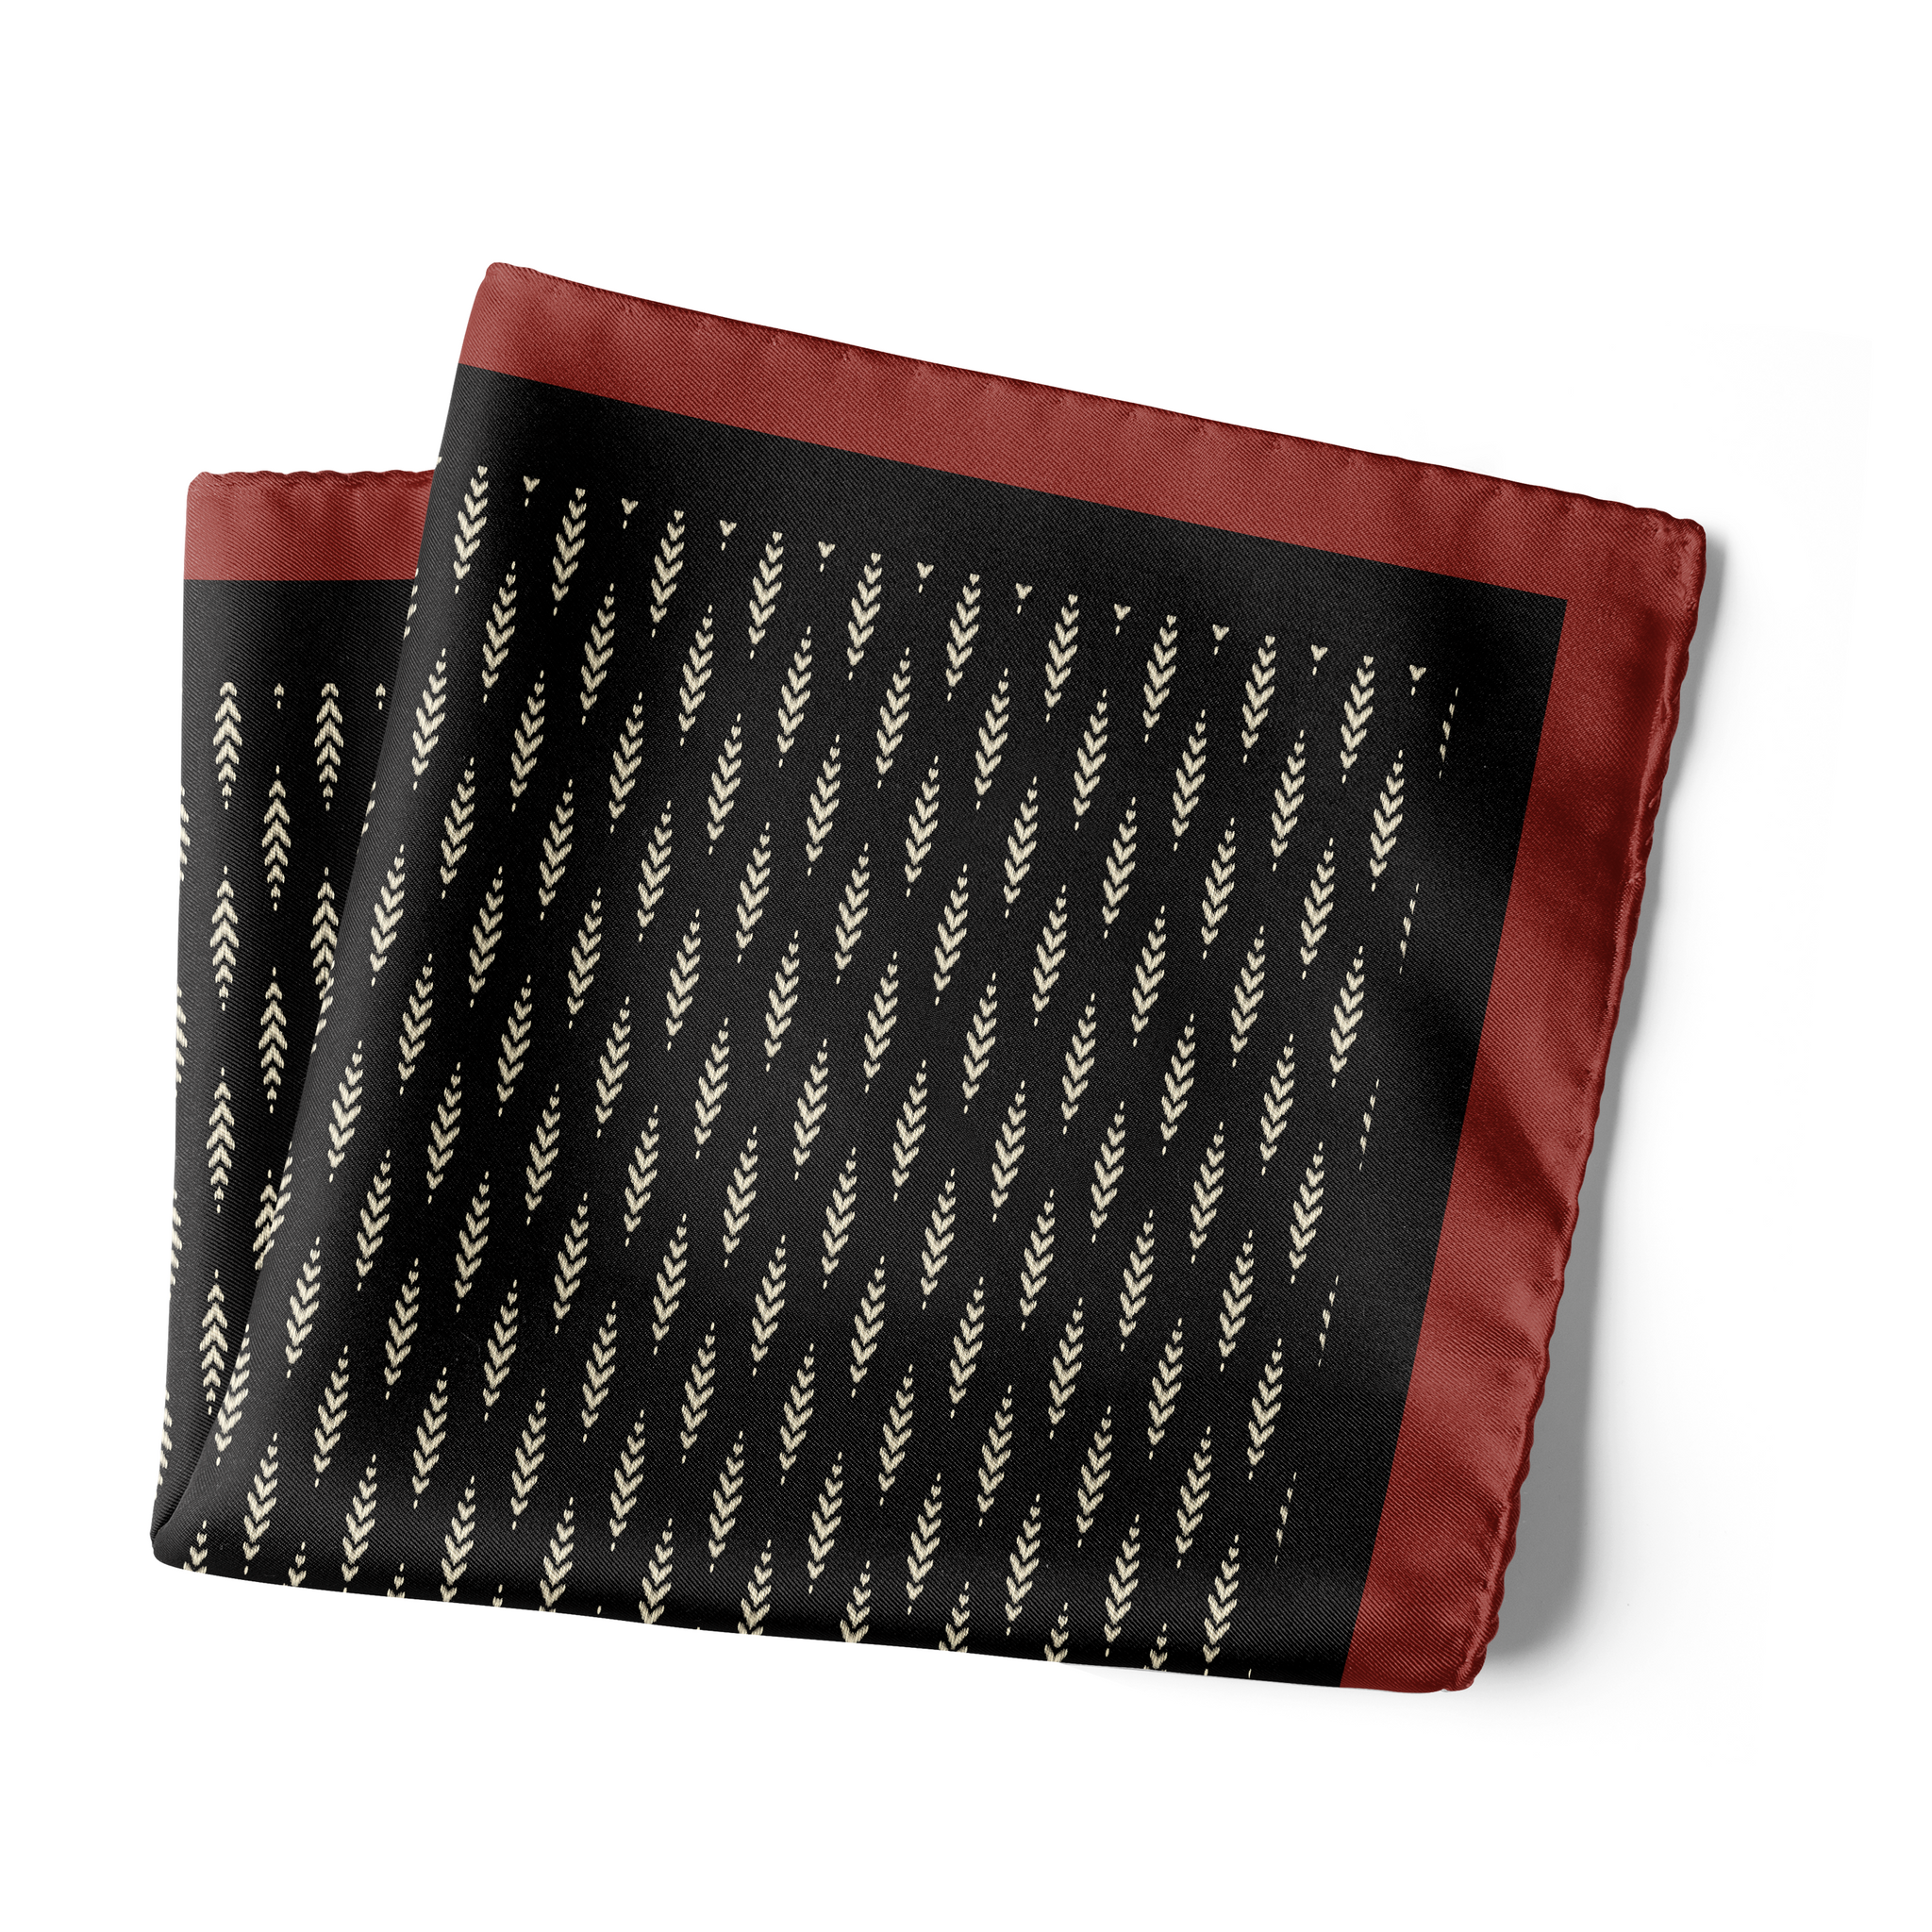 Chokore Black Satin Silk pocket square from the Indian at Heart Collection